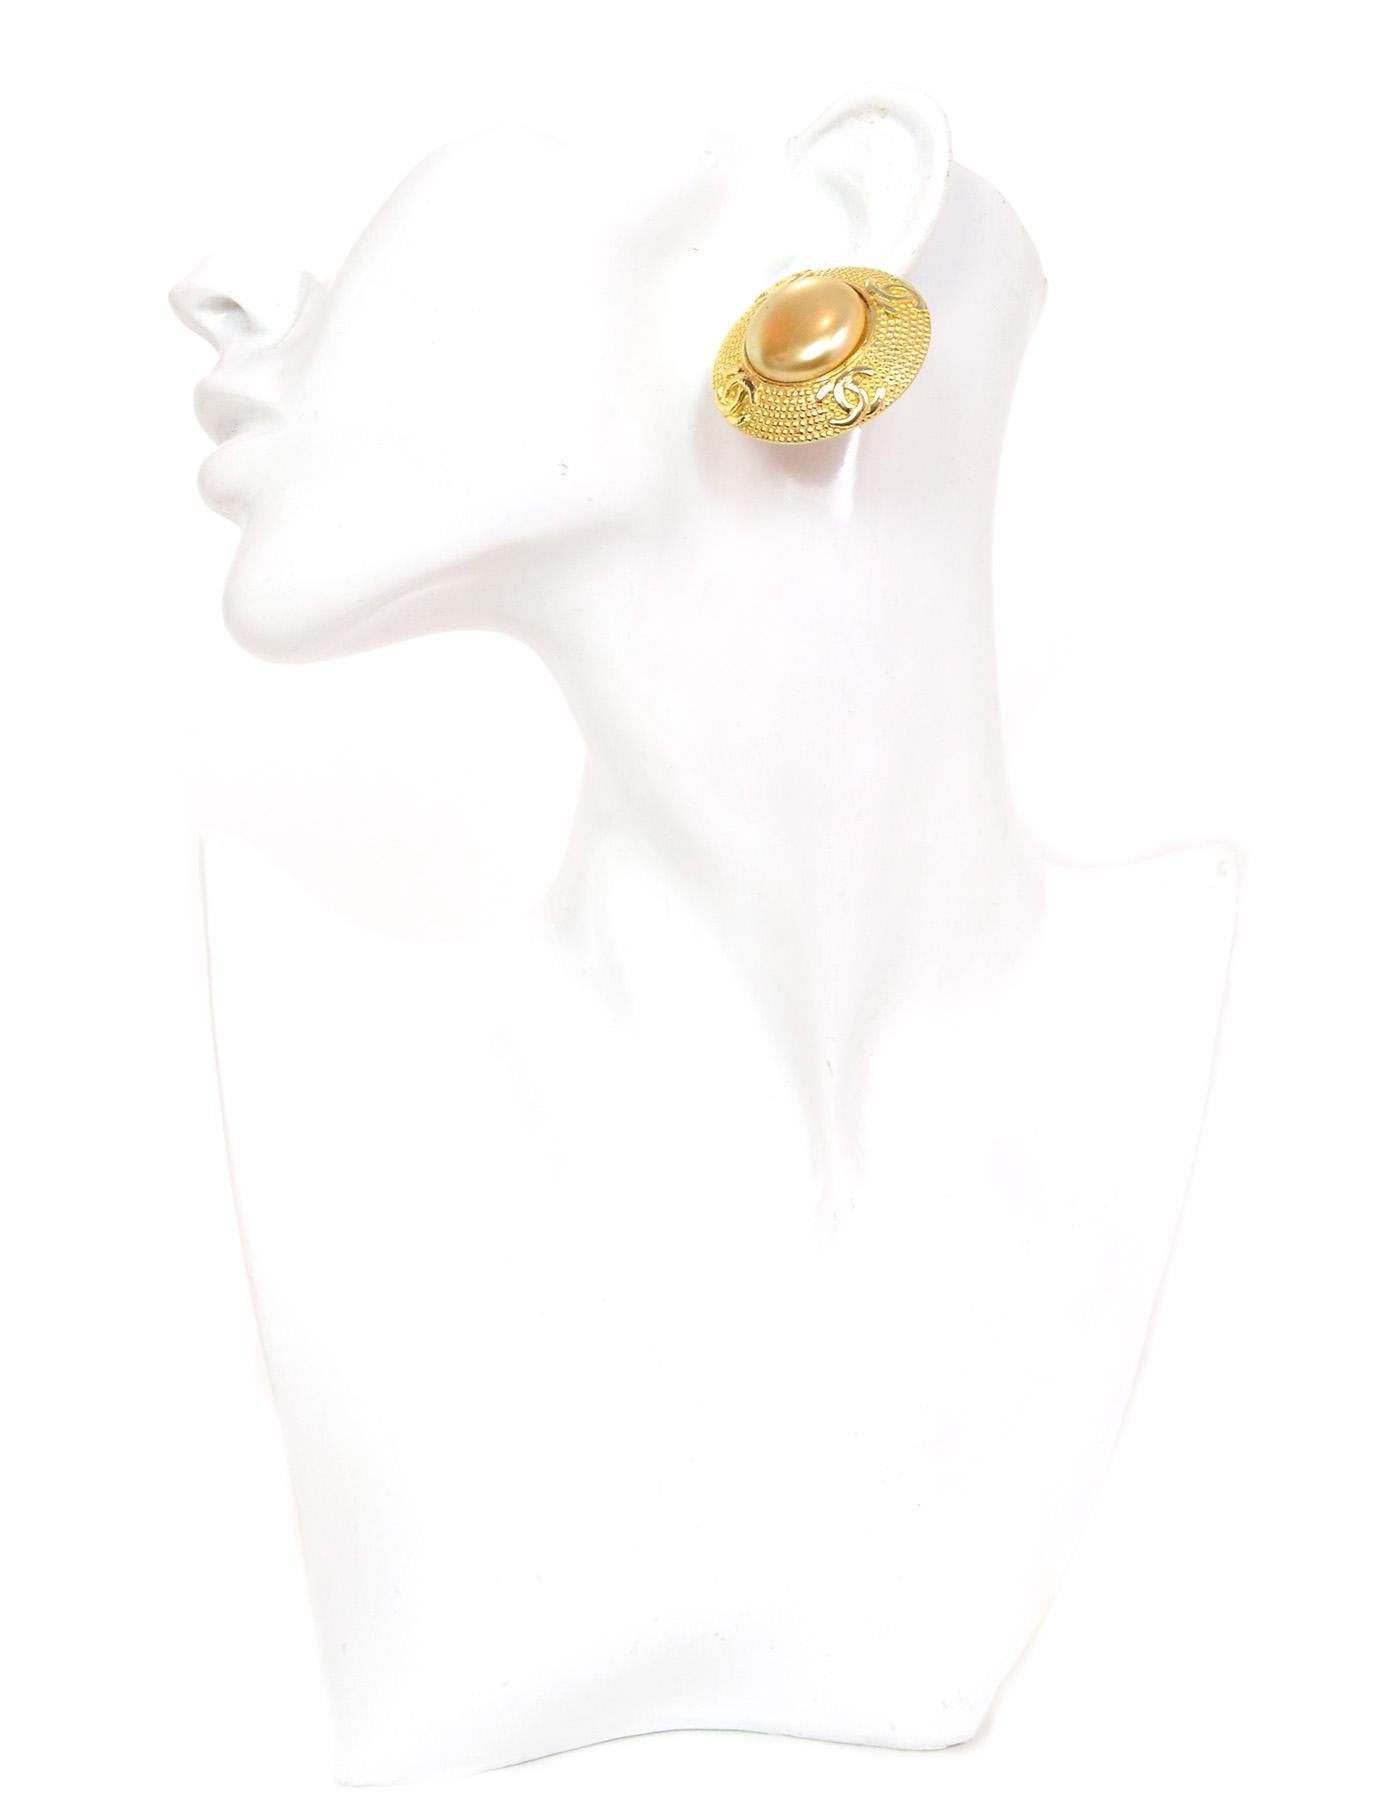 Chanel Vintage '90s Goldtone CC Pearl Clip On Earrings

Made In: France
Year of Production: 1990's
Color: Goldtone
Materials: Goldtone metal 
Hallmarks: 